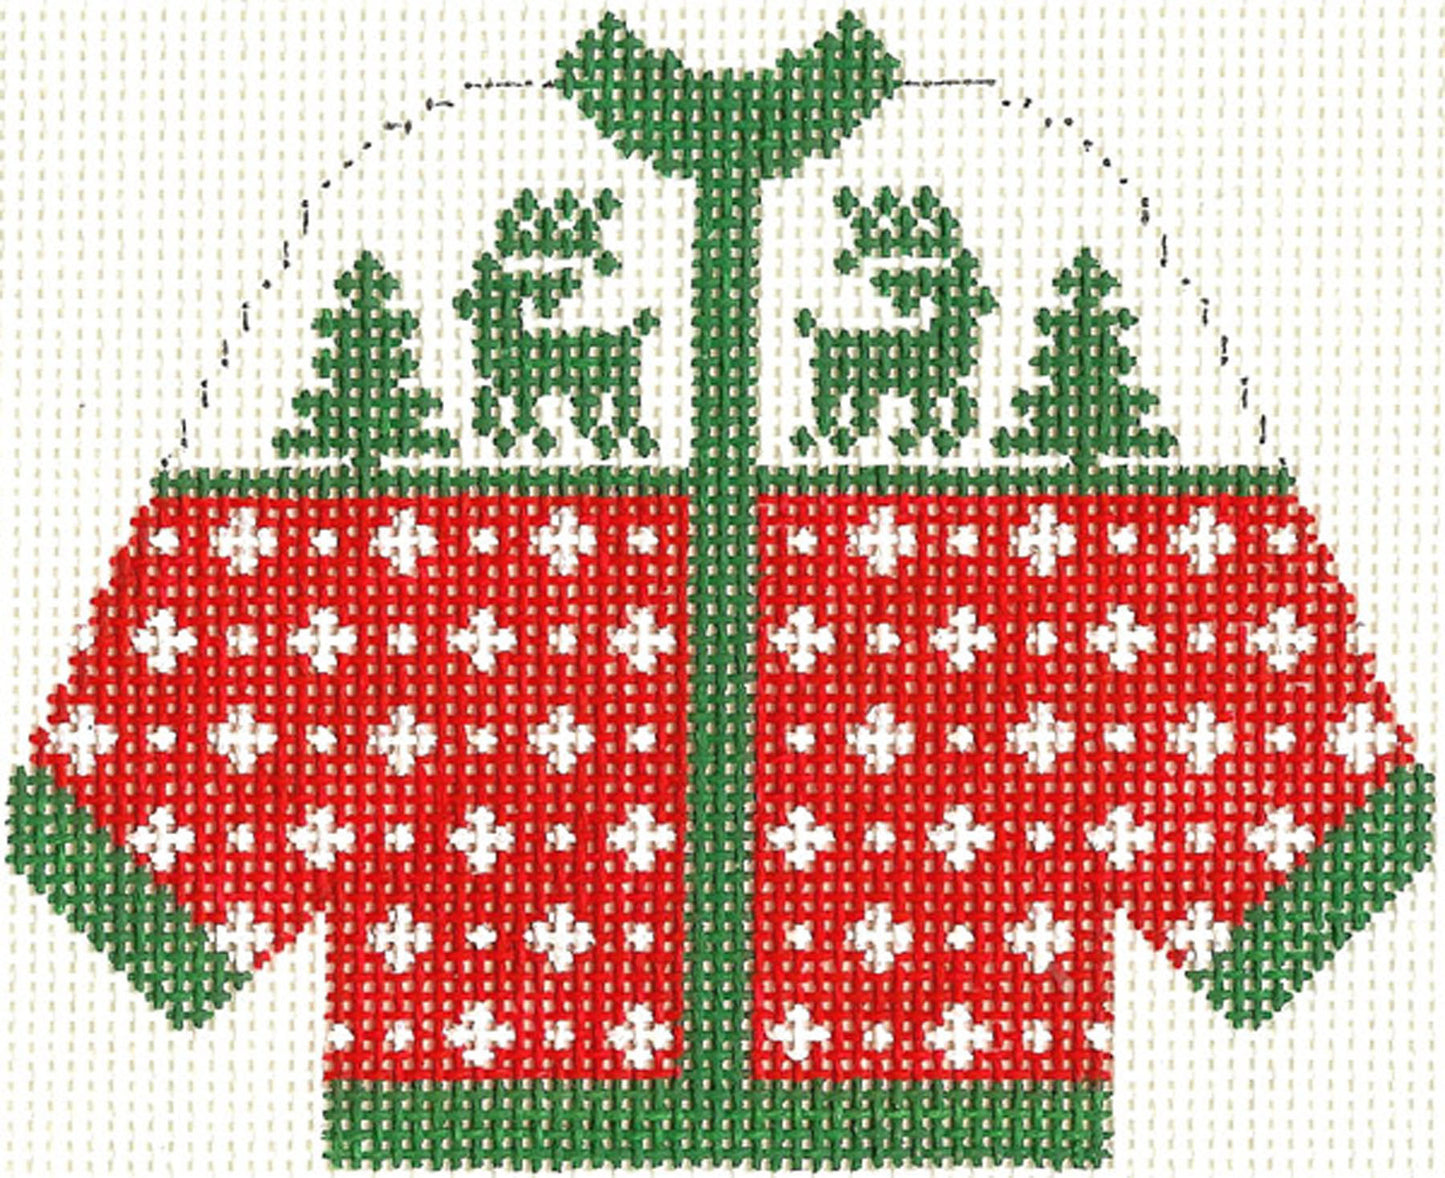 Sweater ~ 2 Reindeer KNITTED CARDIGAN SWEATER handpainted Needlepoint Canvas Silver Needle